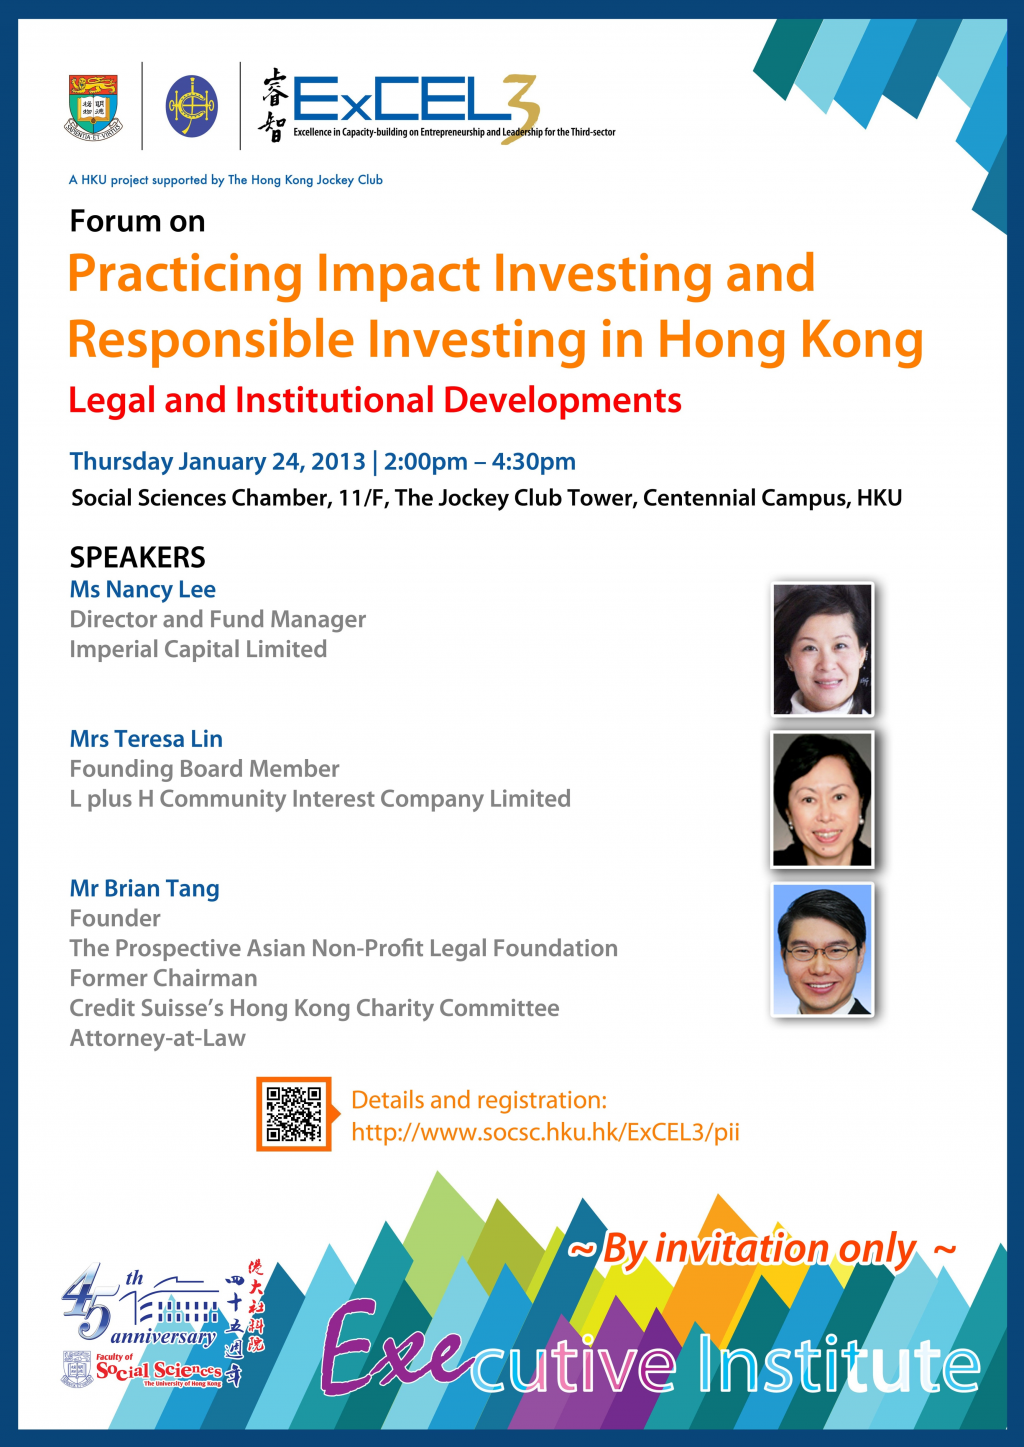 Forum on Practicing Impact Investing and Responsible Investing in Hong Kong: Legal and Institutional Developments